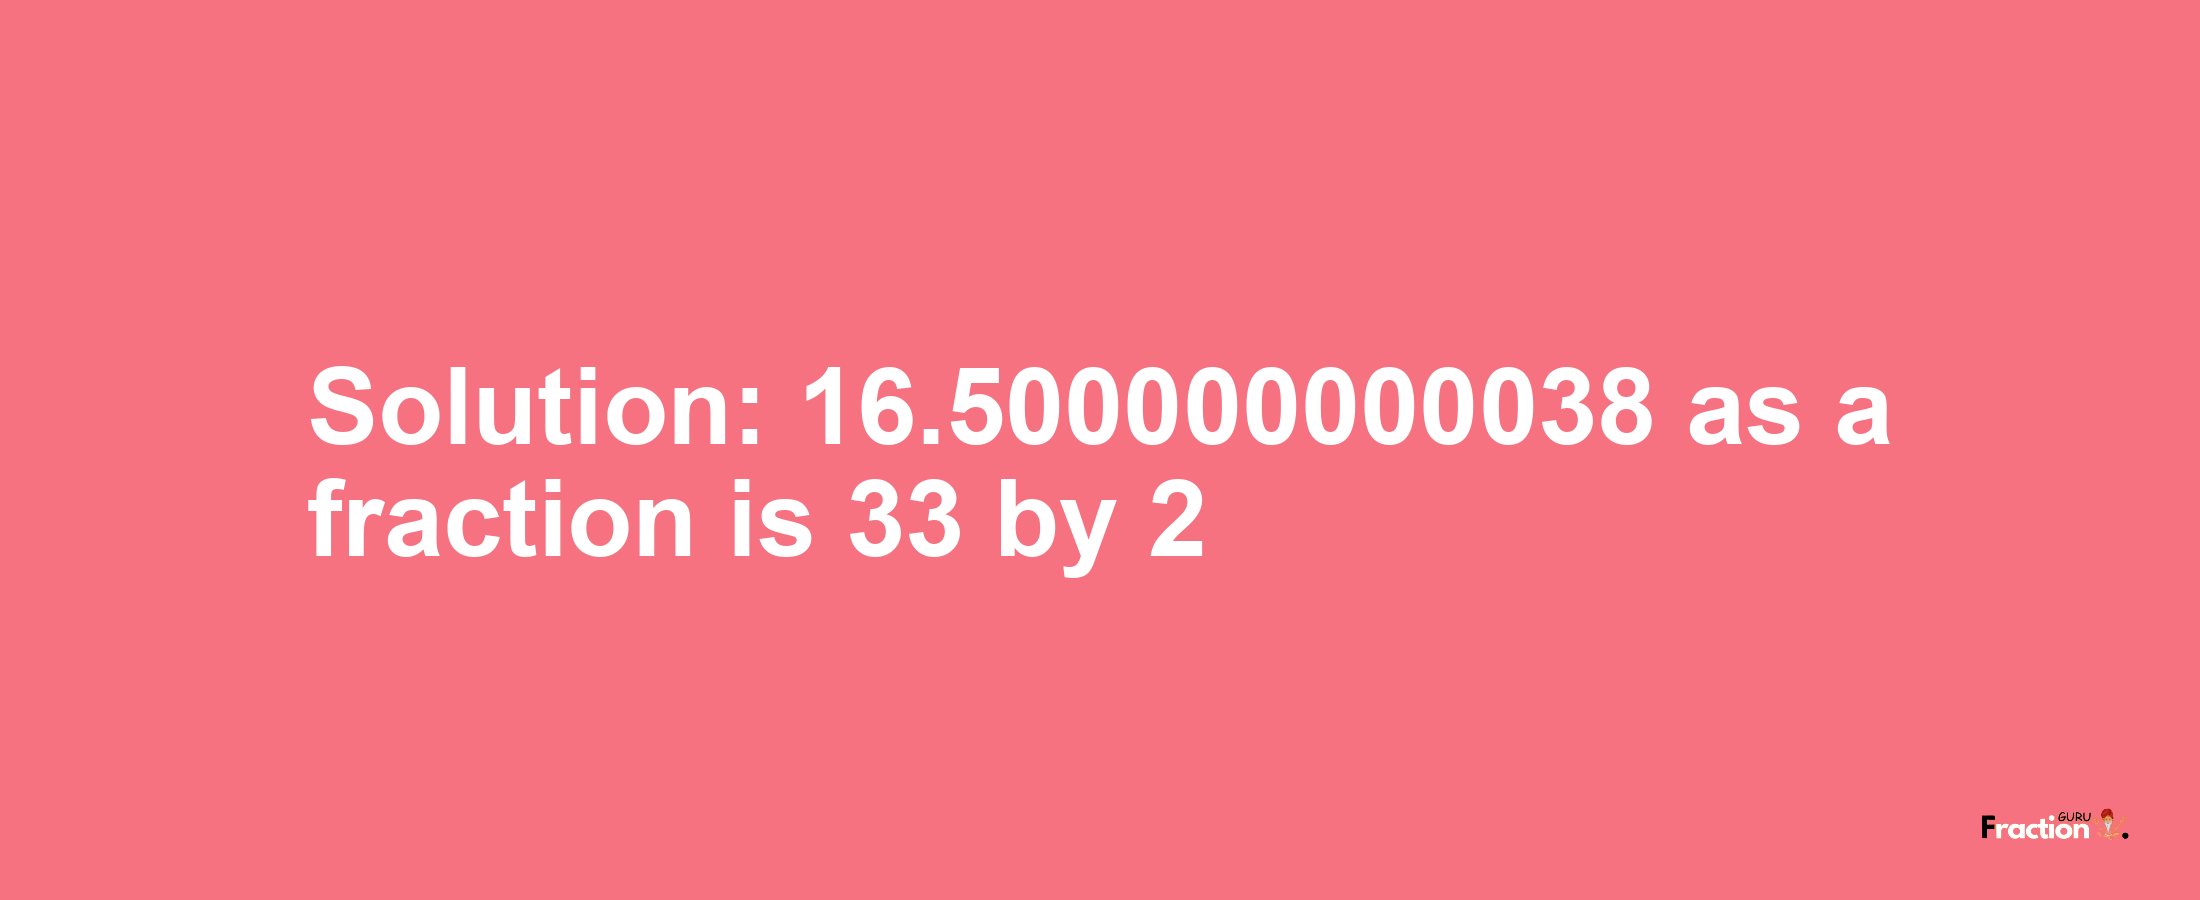 Solution:16.500000000038 as a fraction is 33/2